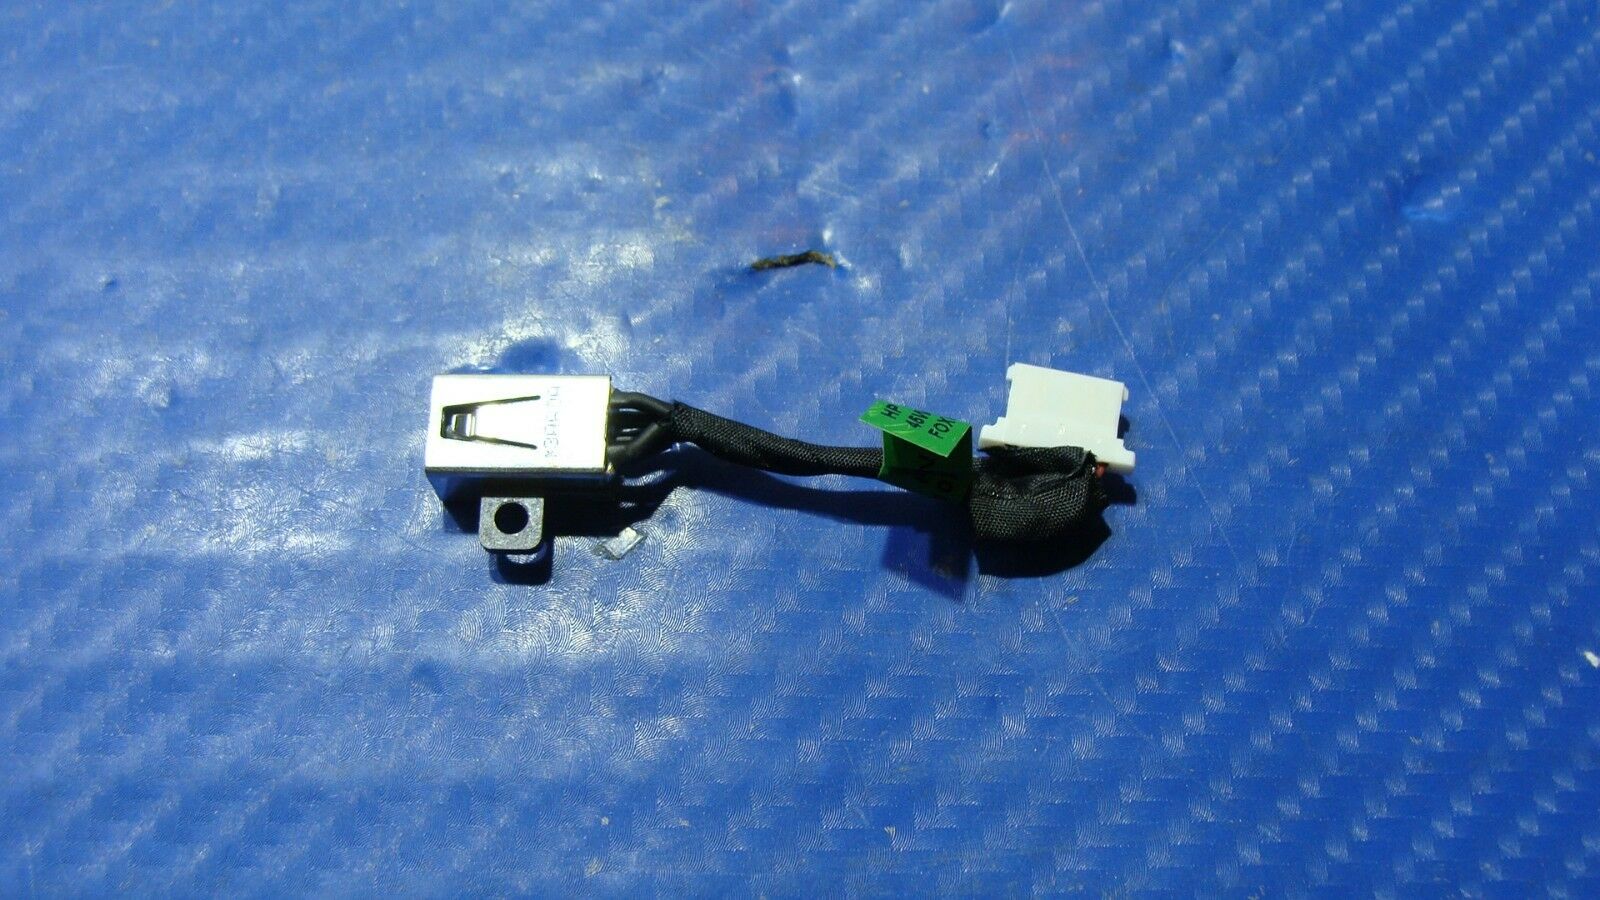 HP Spectre 13-3010dx 13.3" Genuine Laptop DC IN Power Jack w/Cable 743212-FD1 HP